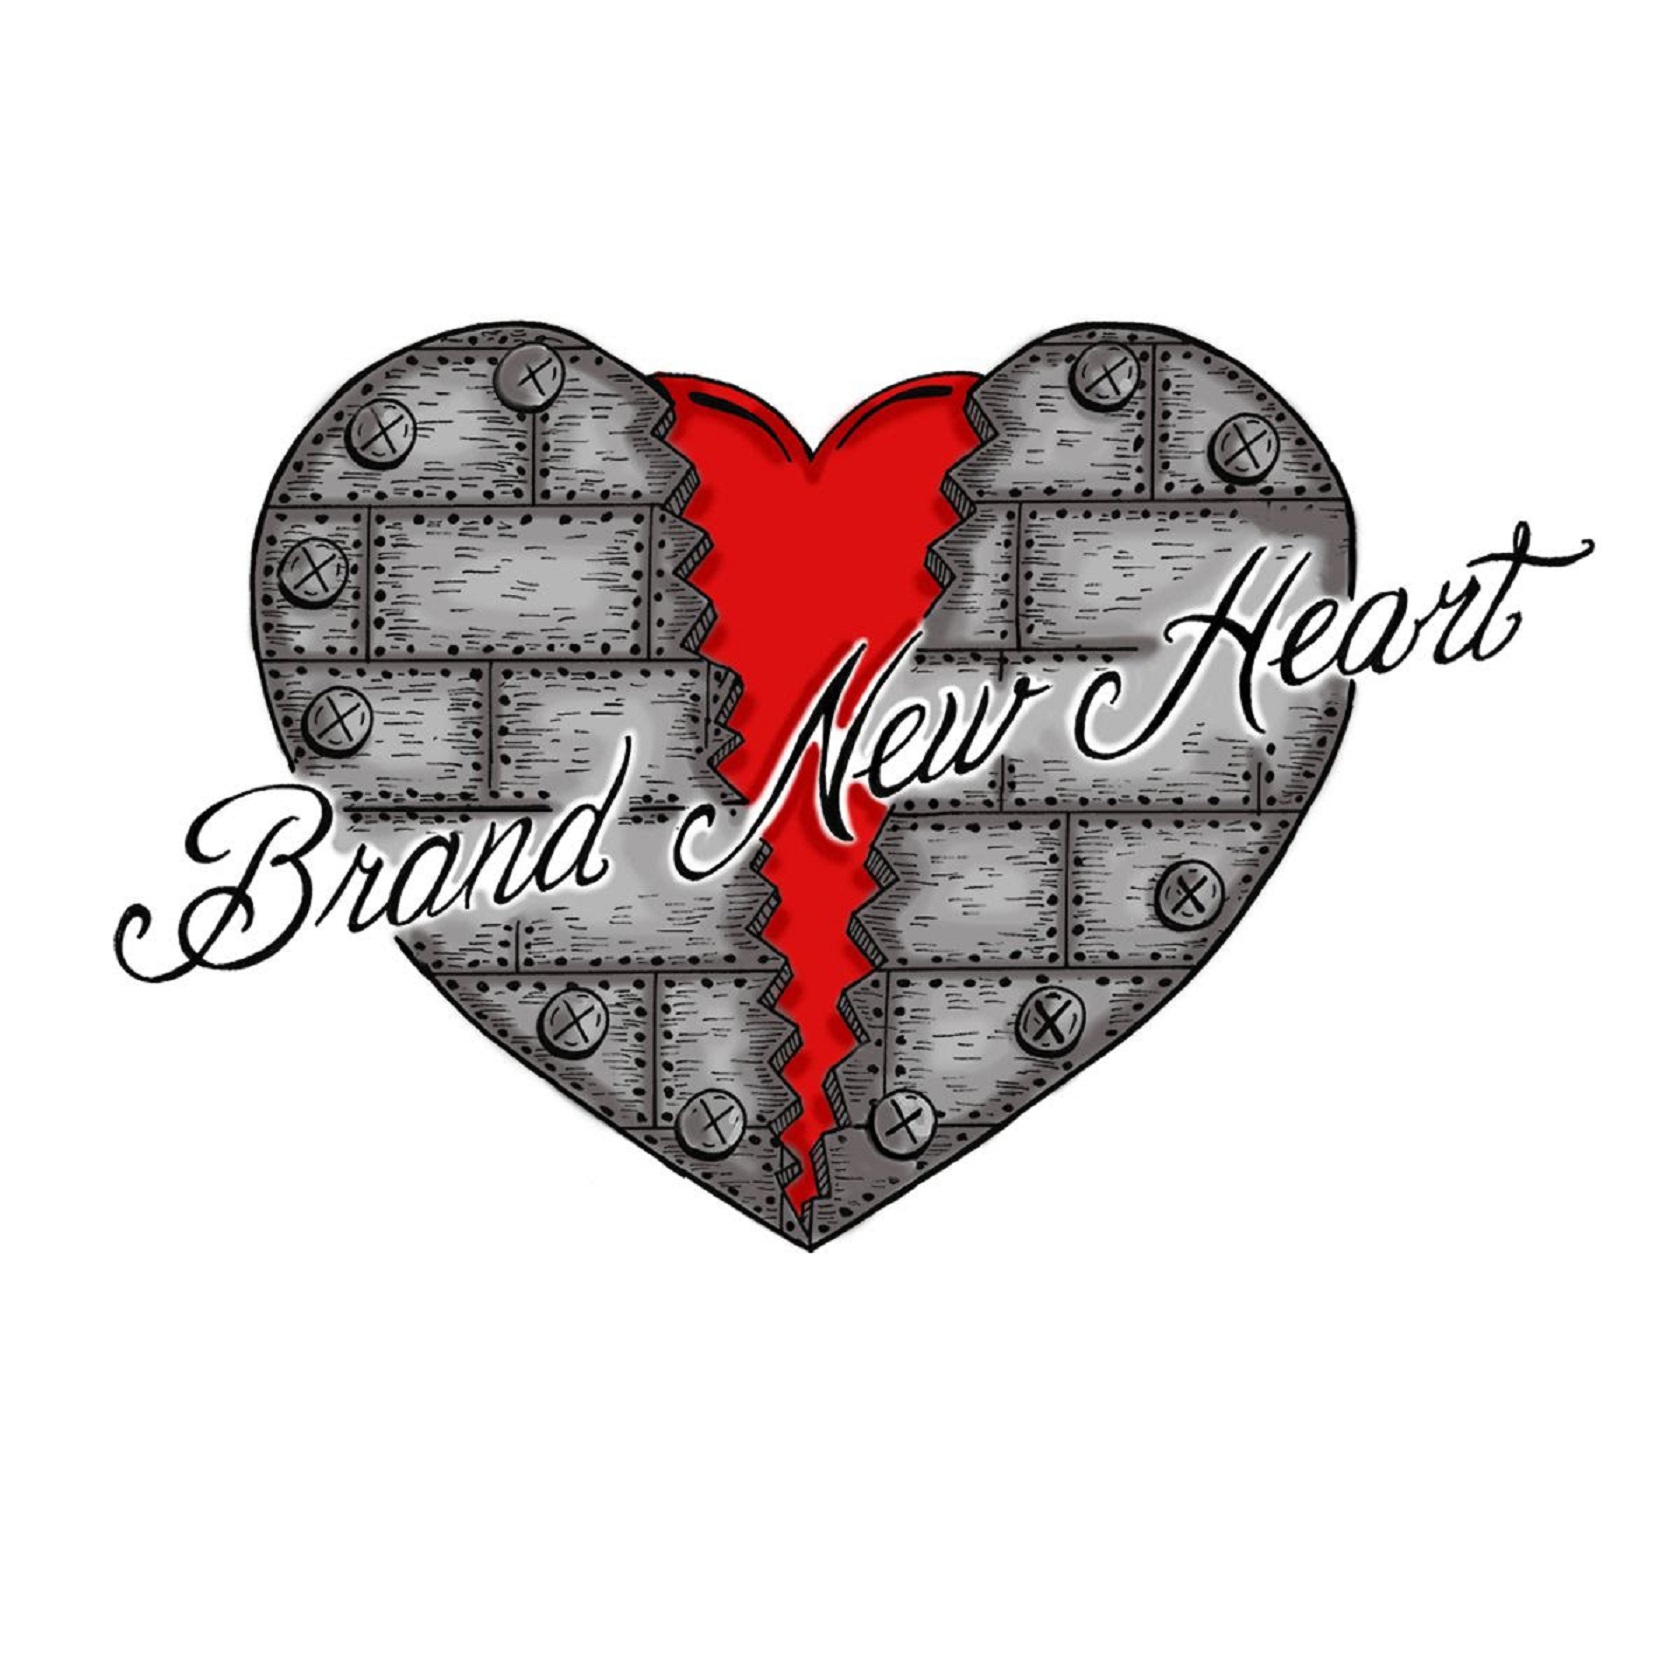 MEMPHIS ROYAL BROTHERS RELEASE "BRAND NEW HEART" FEATURING WENDY MOTEN & JIM LAUDERDALE